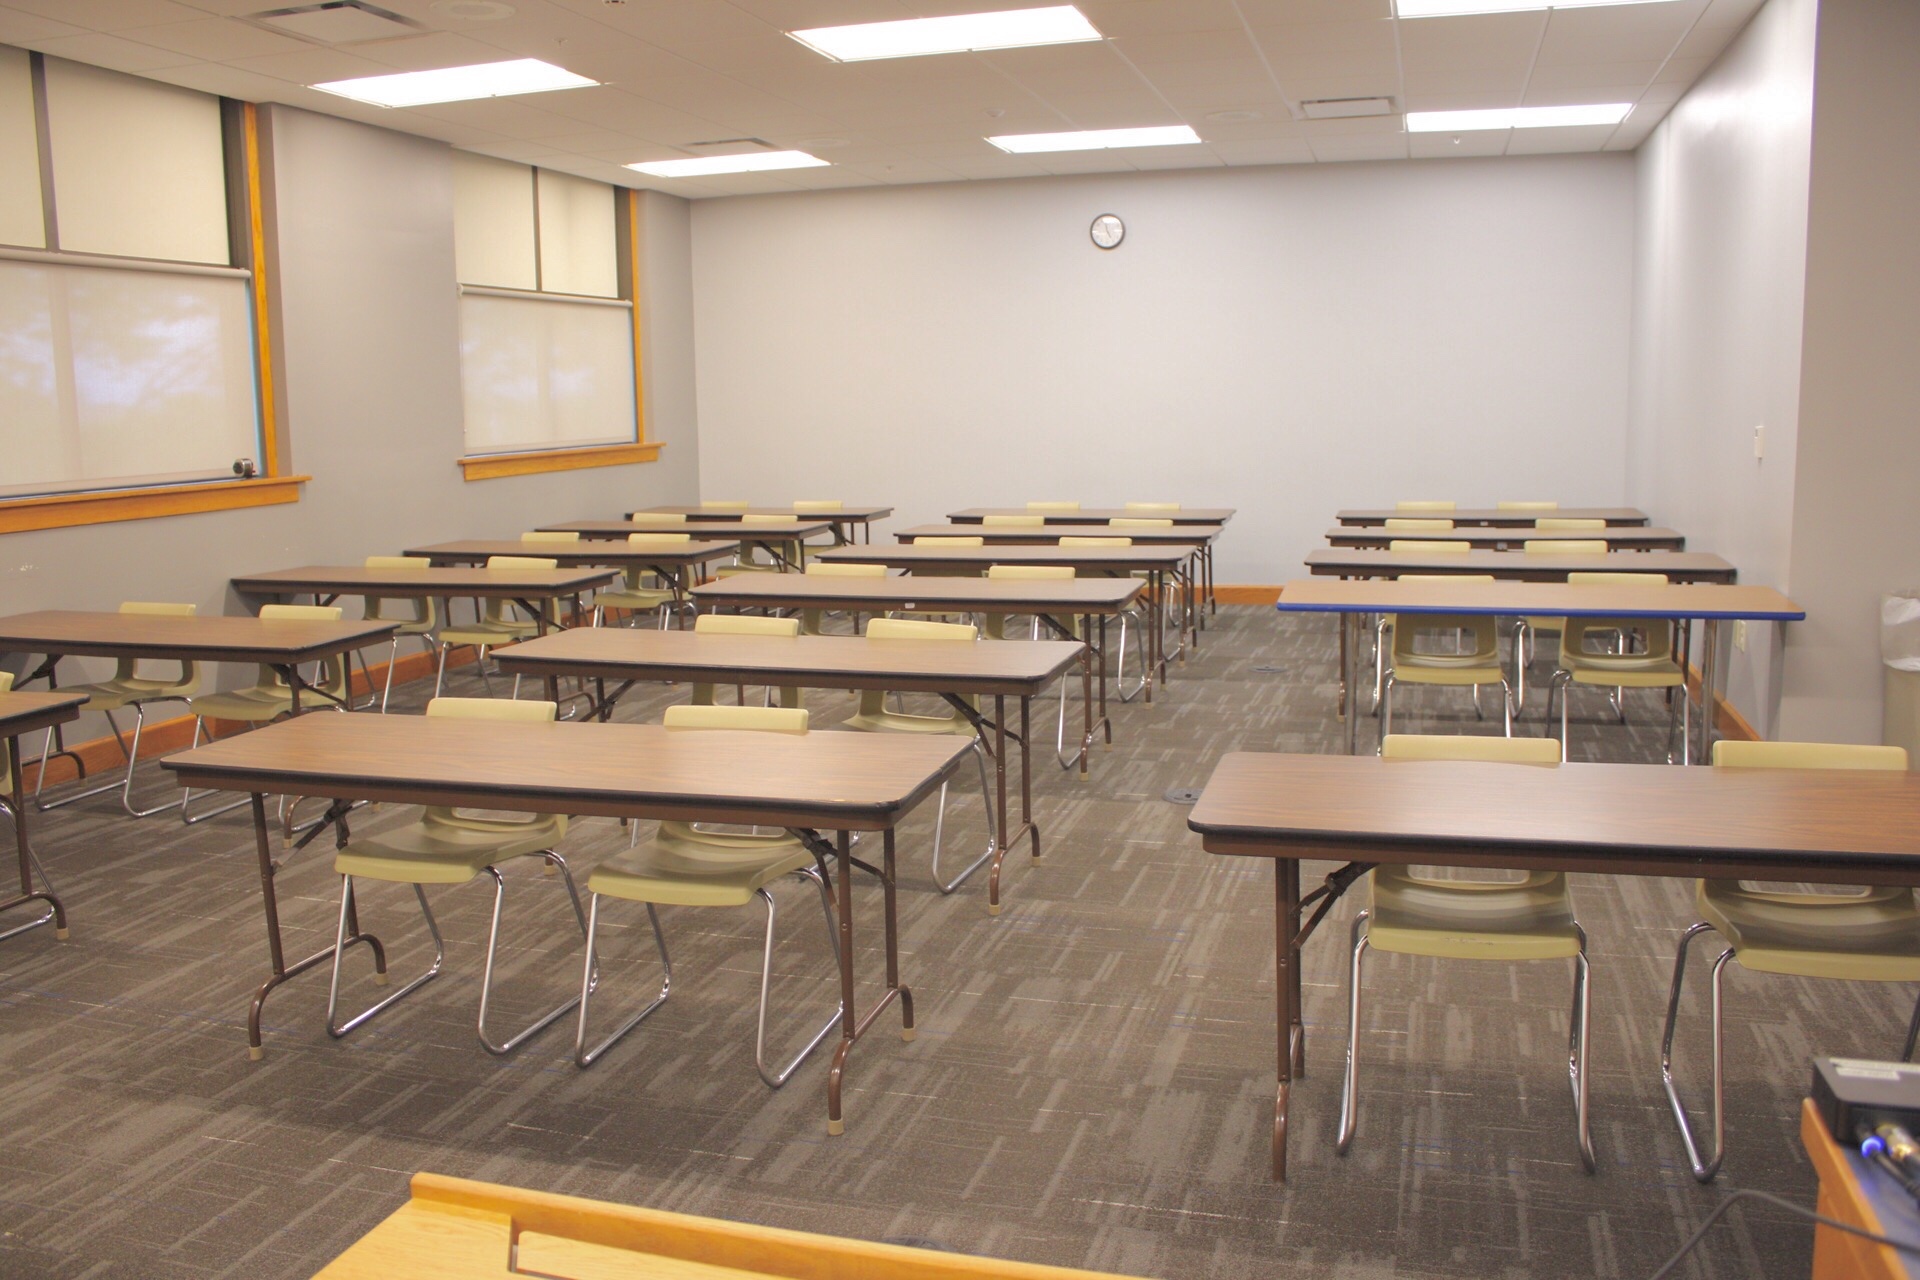 A view from the front of TJ Majors 301 showing tables and chairs.